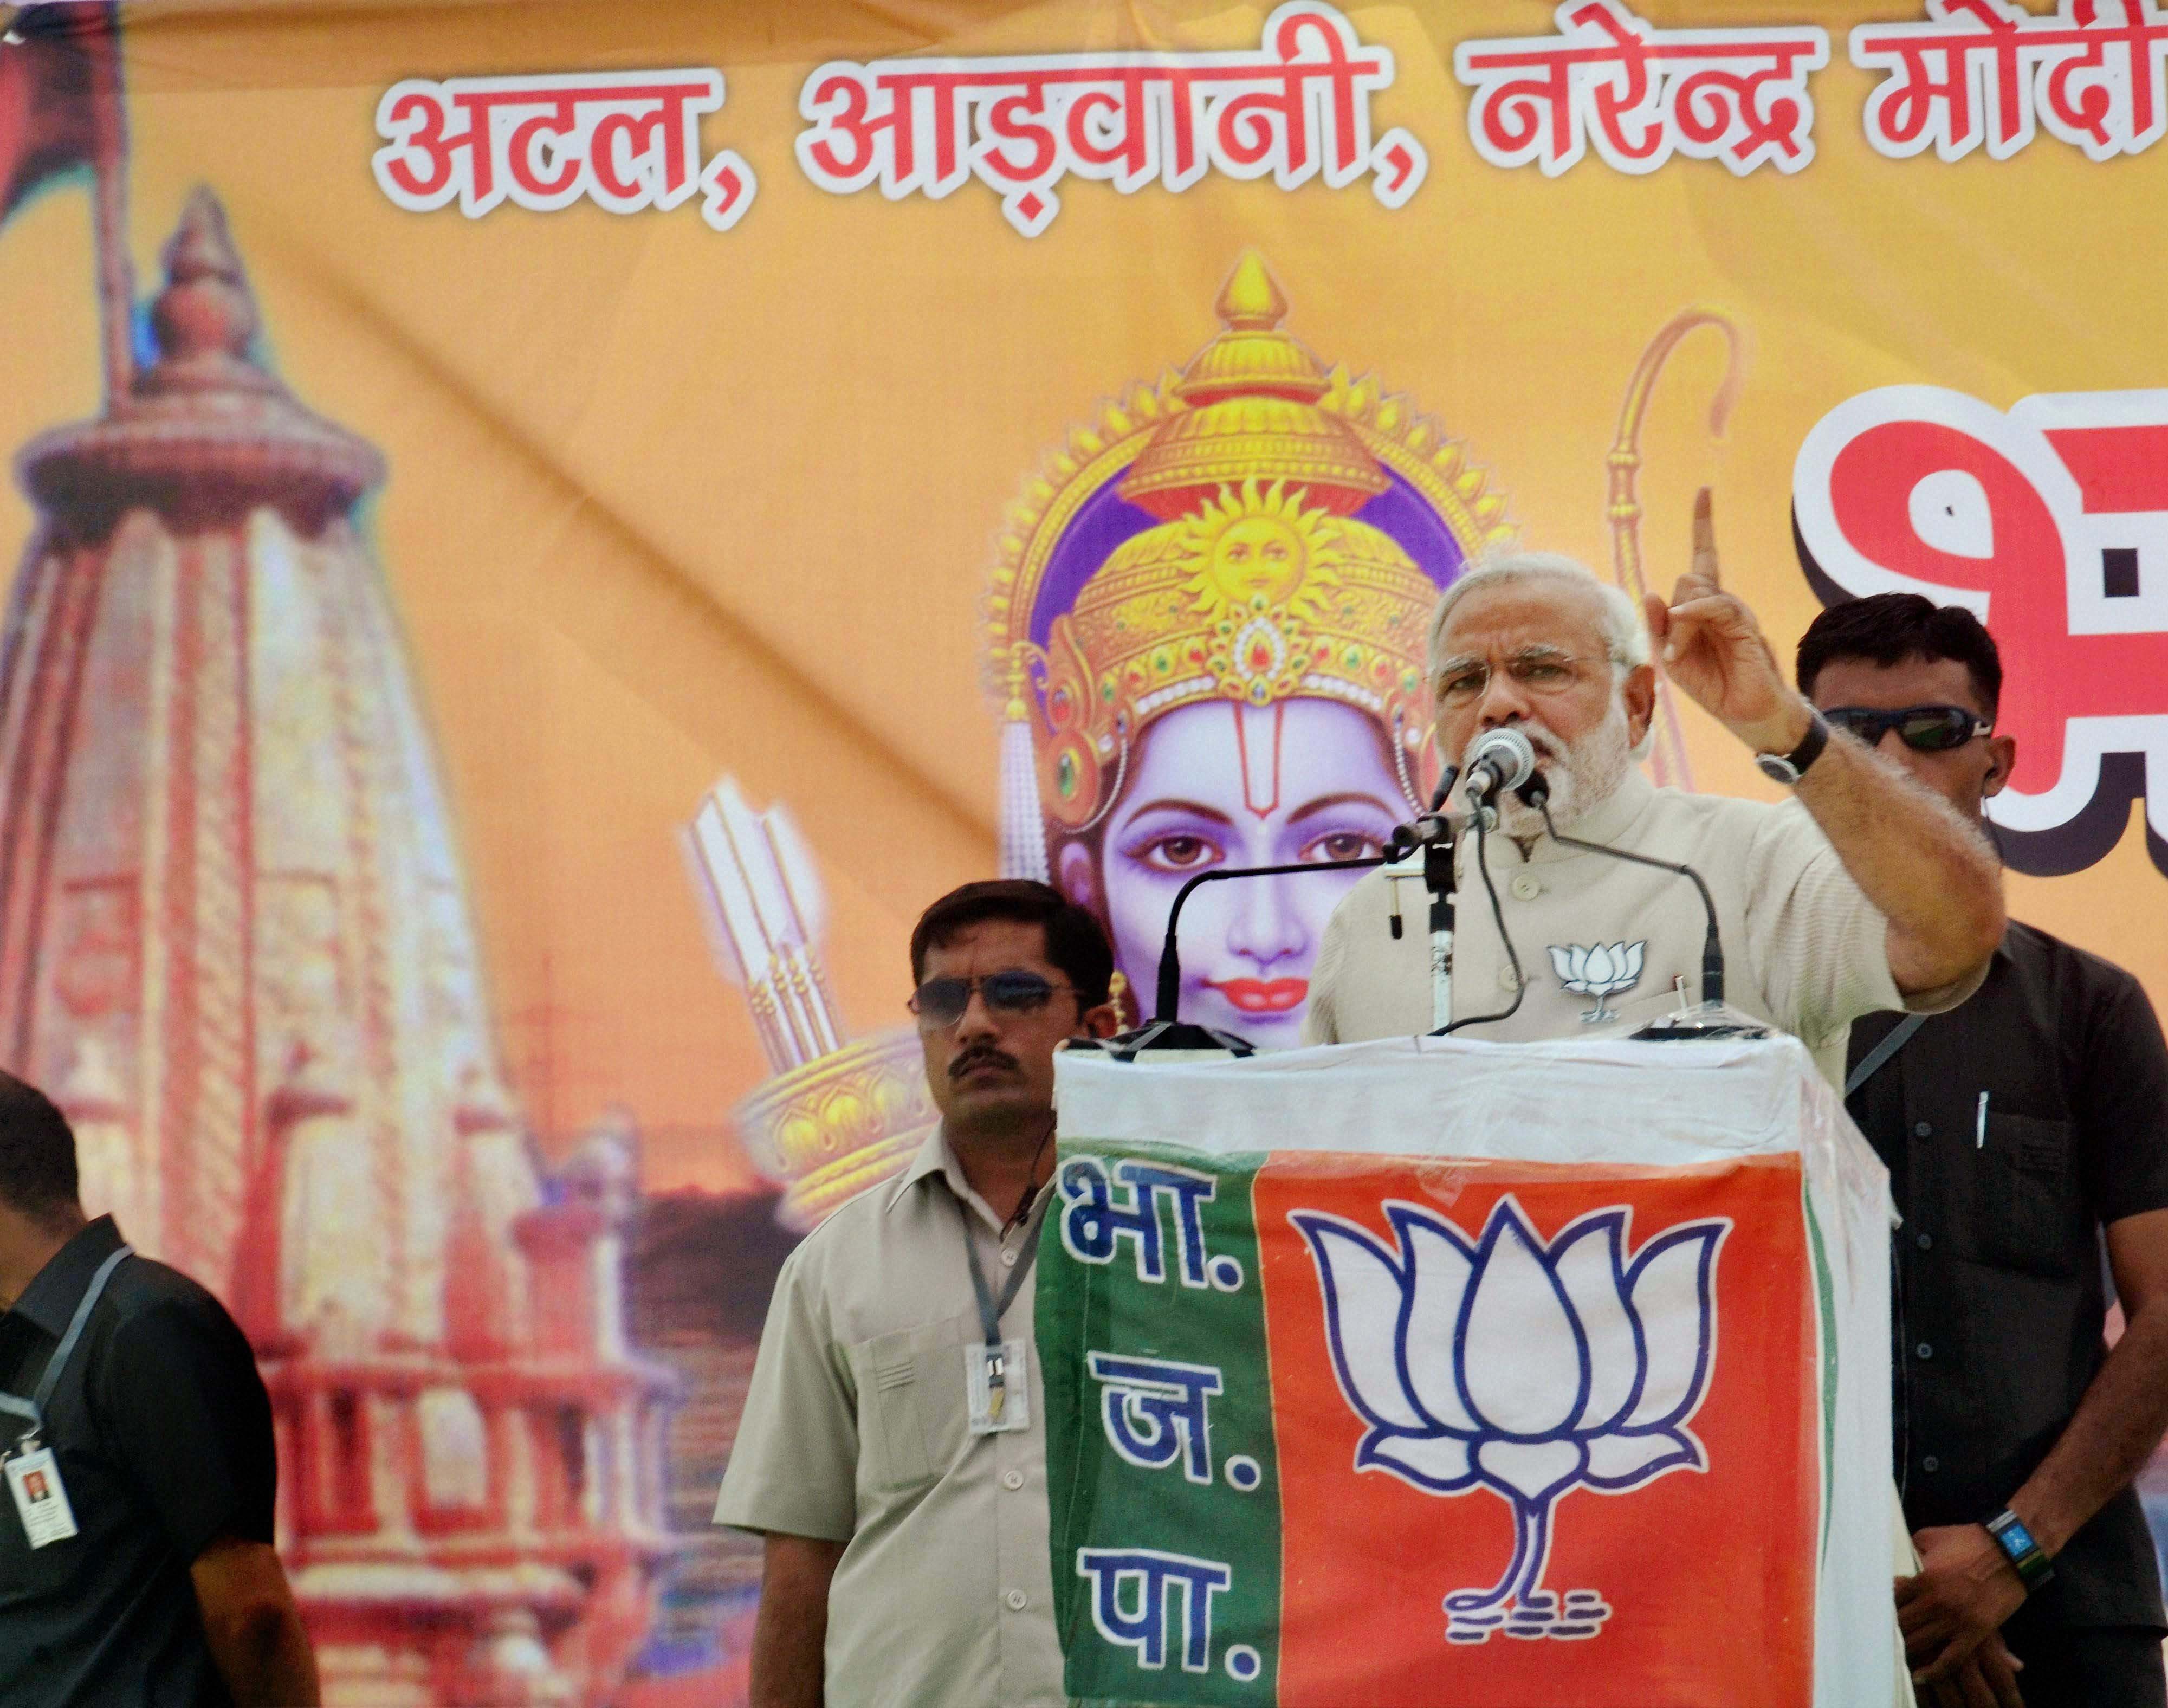 For Narendra Modi Rally With Lord Ram Backdrop, Election Commission Seeks Report